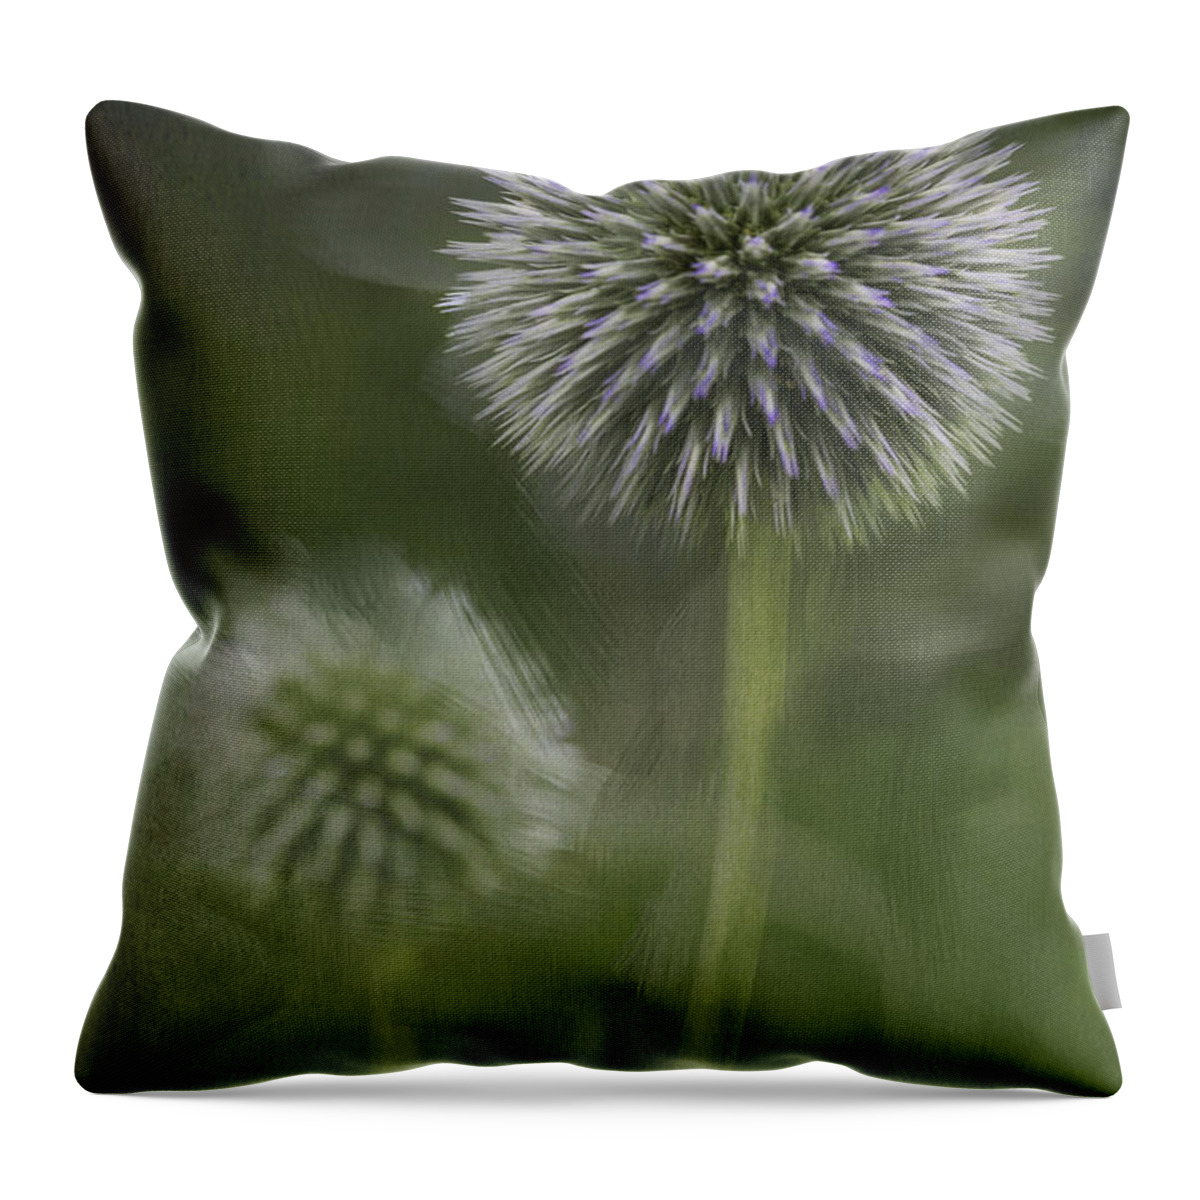 Flower Throw Pillow featuring the photograph Thistle by Fran Gallogly